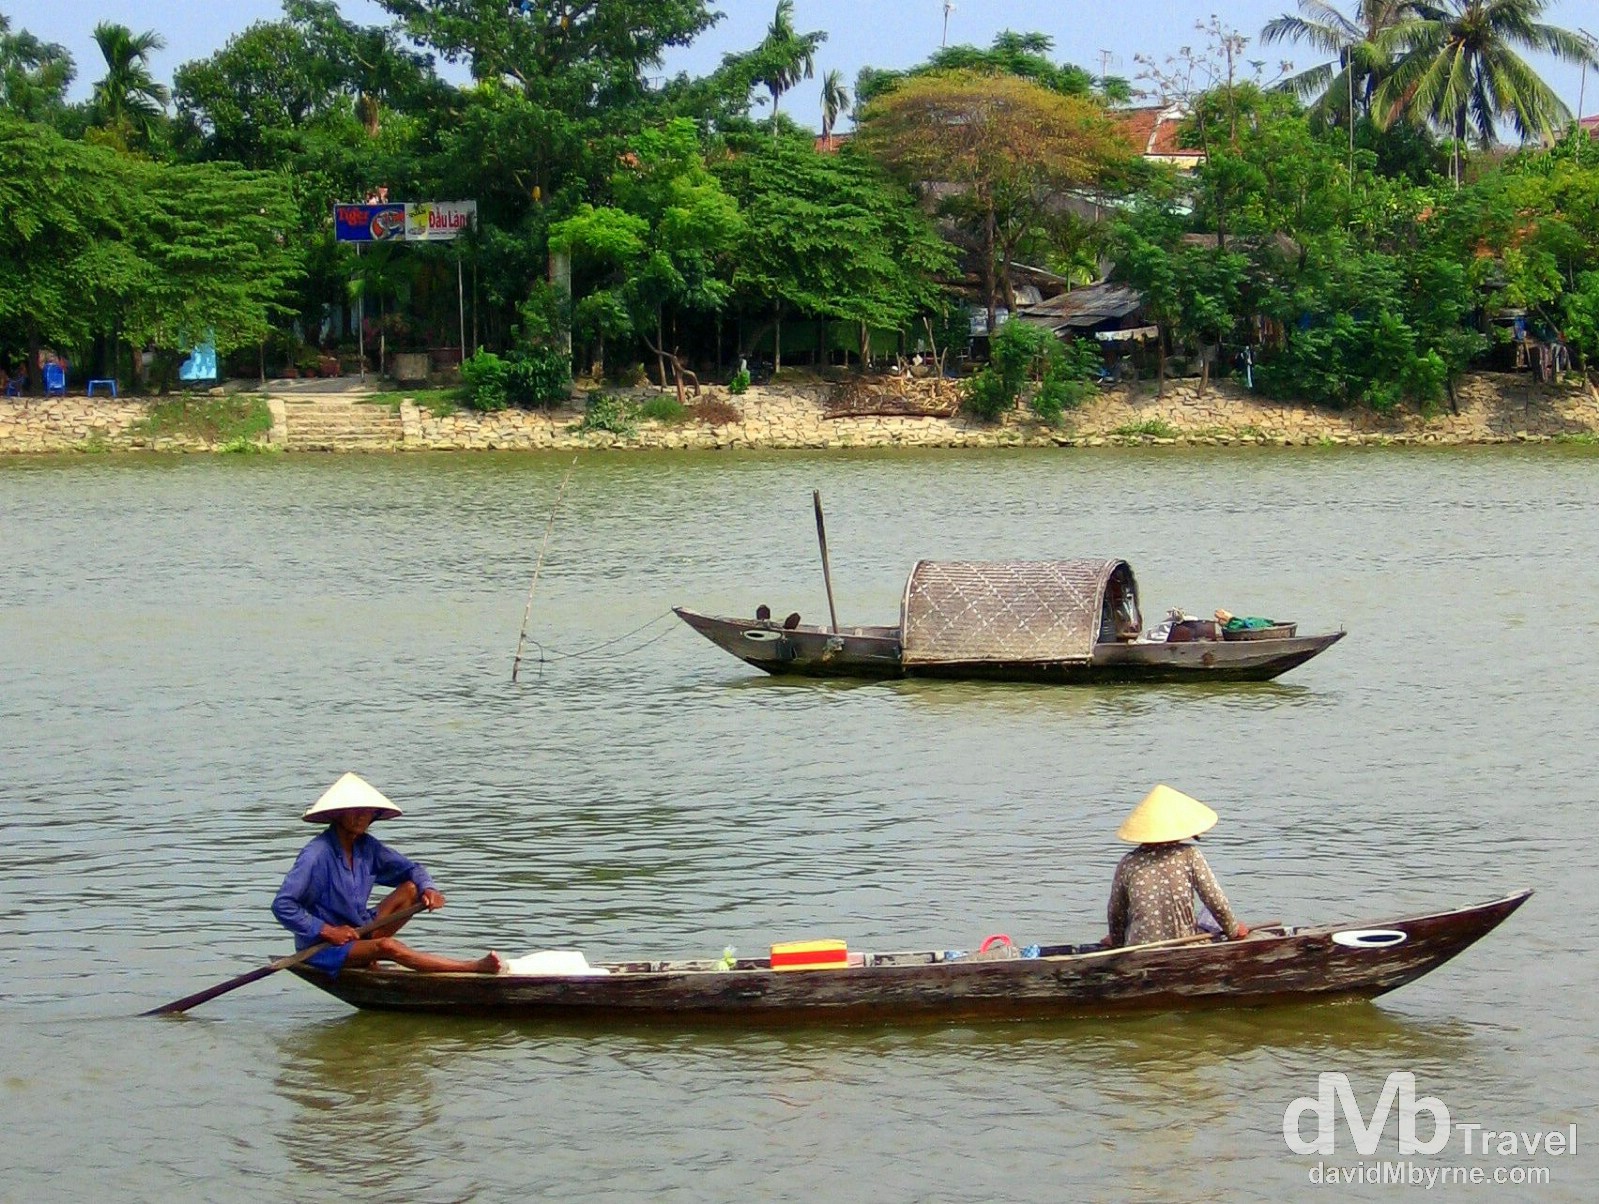 On the waterways of Hoi An, central Vietnam. September 11th, 2005. 